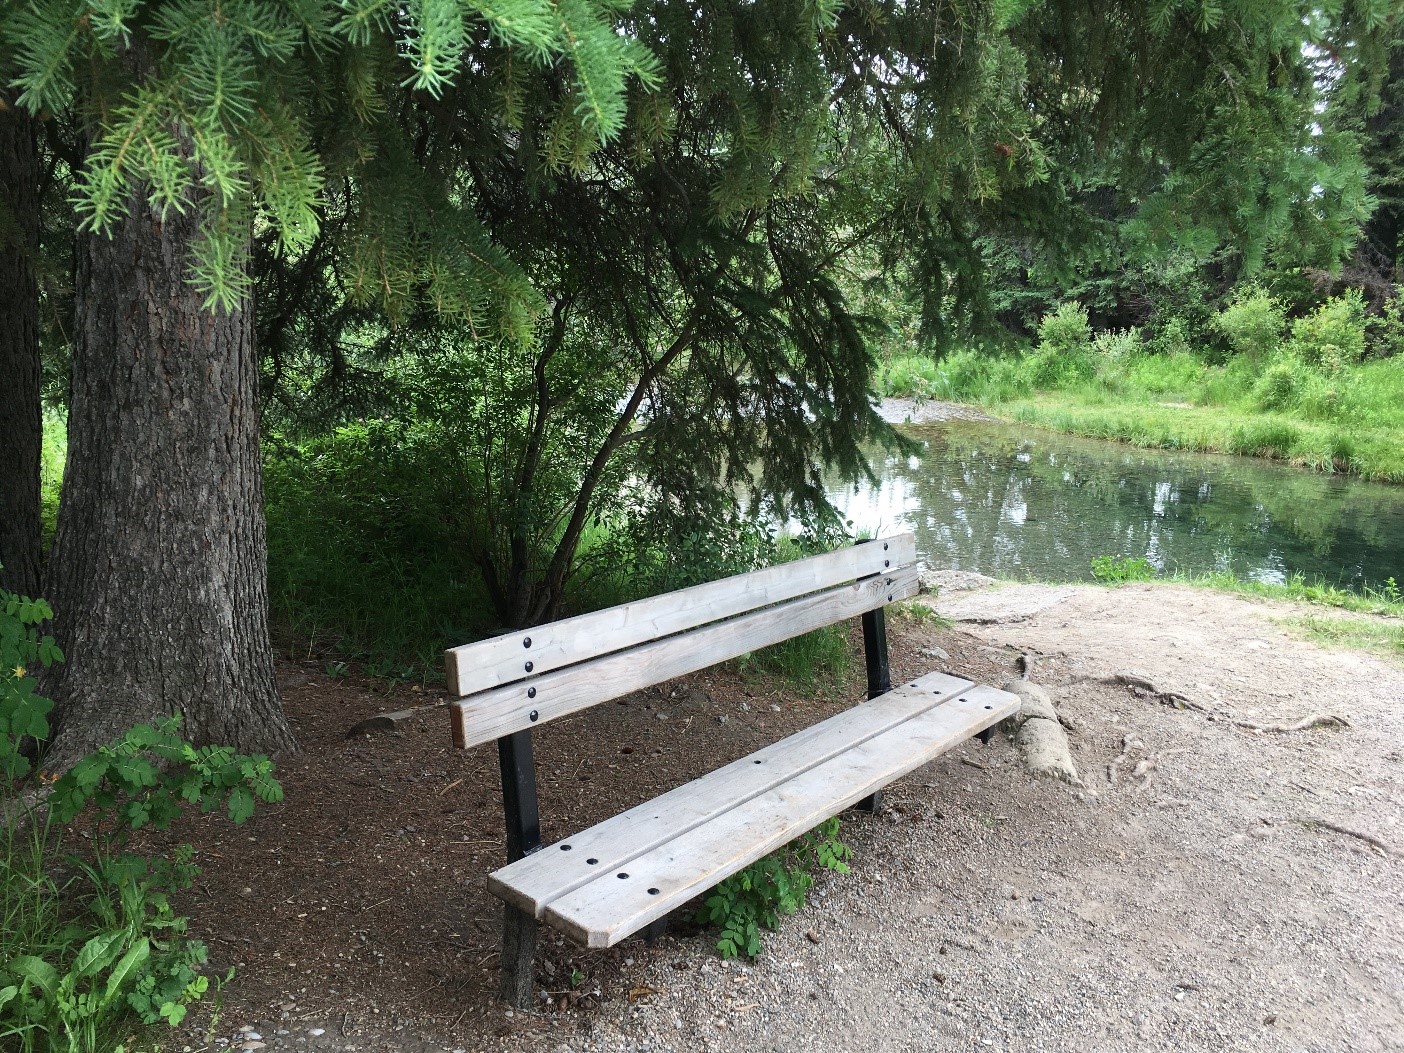 Bench at a 3-way intersection